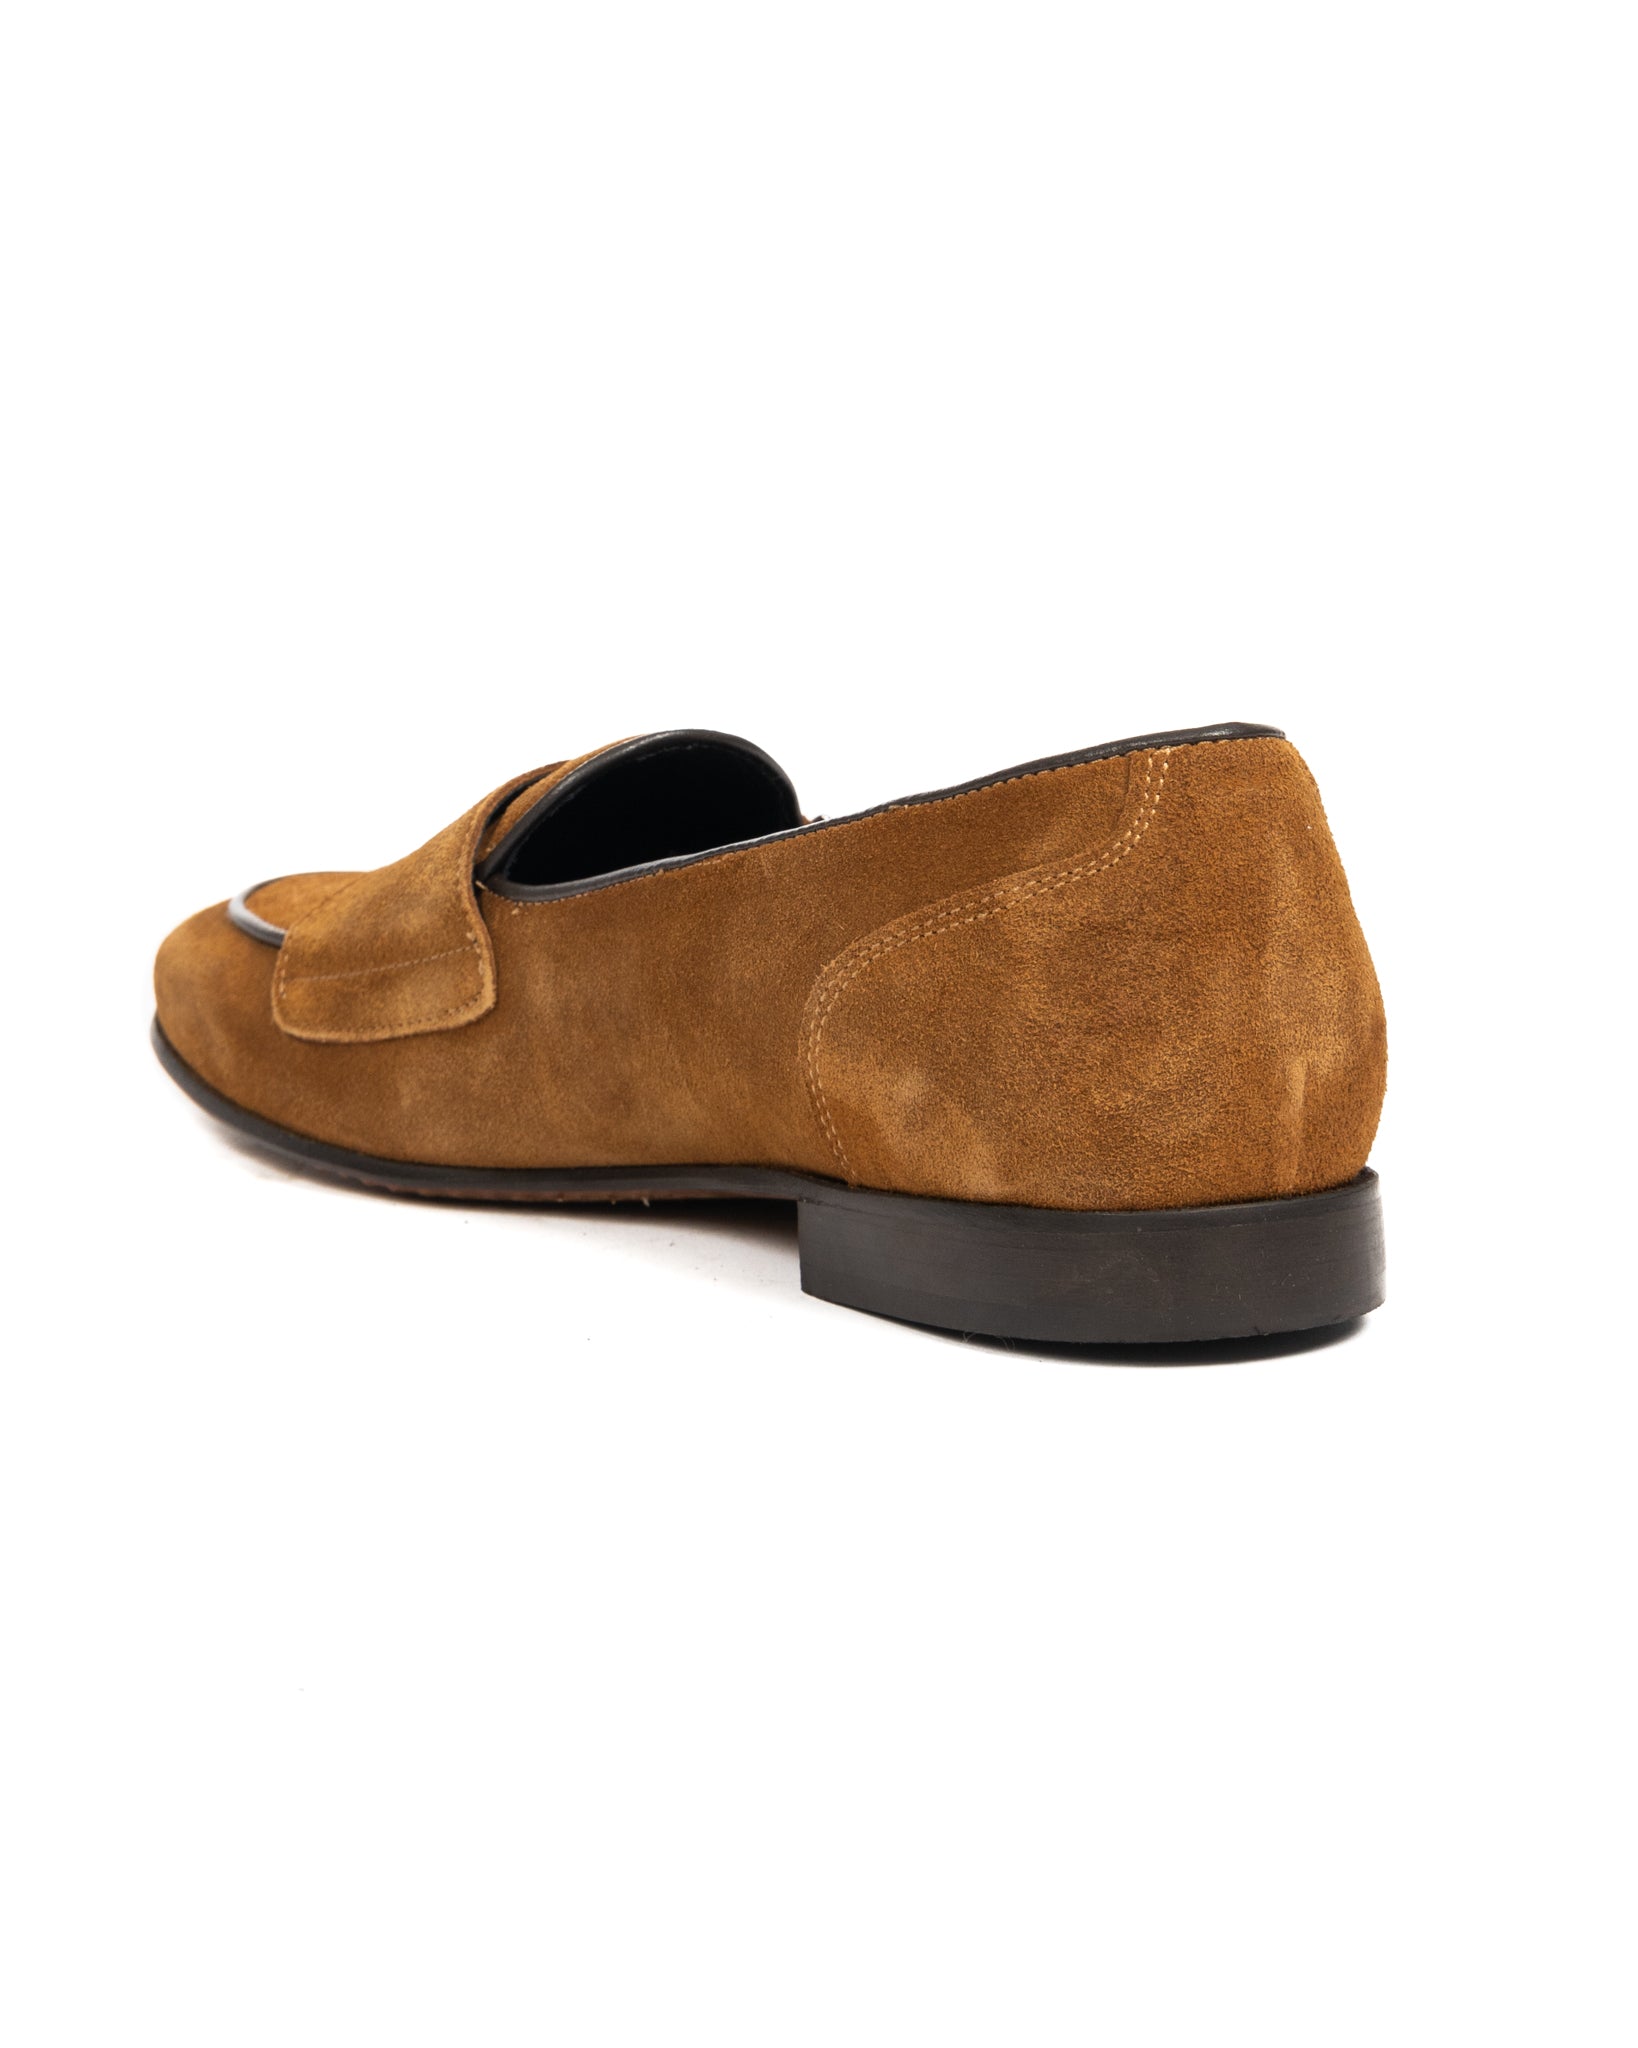 Gianni - camel suede moccasin with double buckle